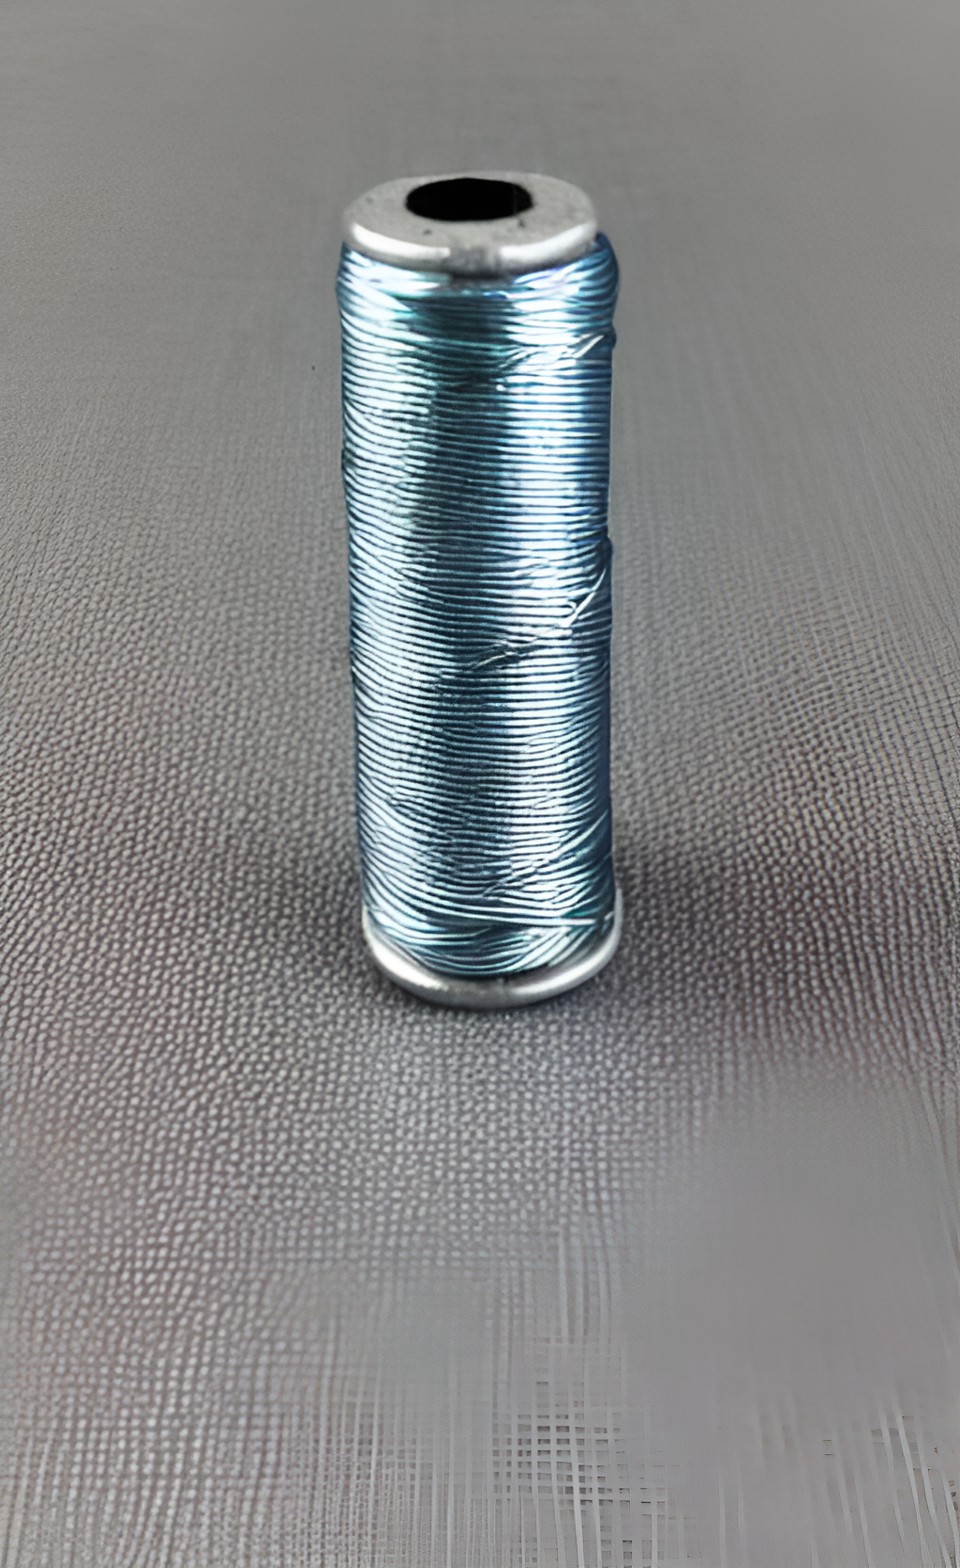 20 Gauge (0.8mm) 304 Stainless Steel Wire for Bailing Wire